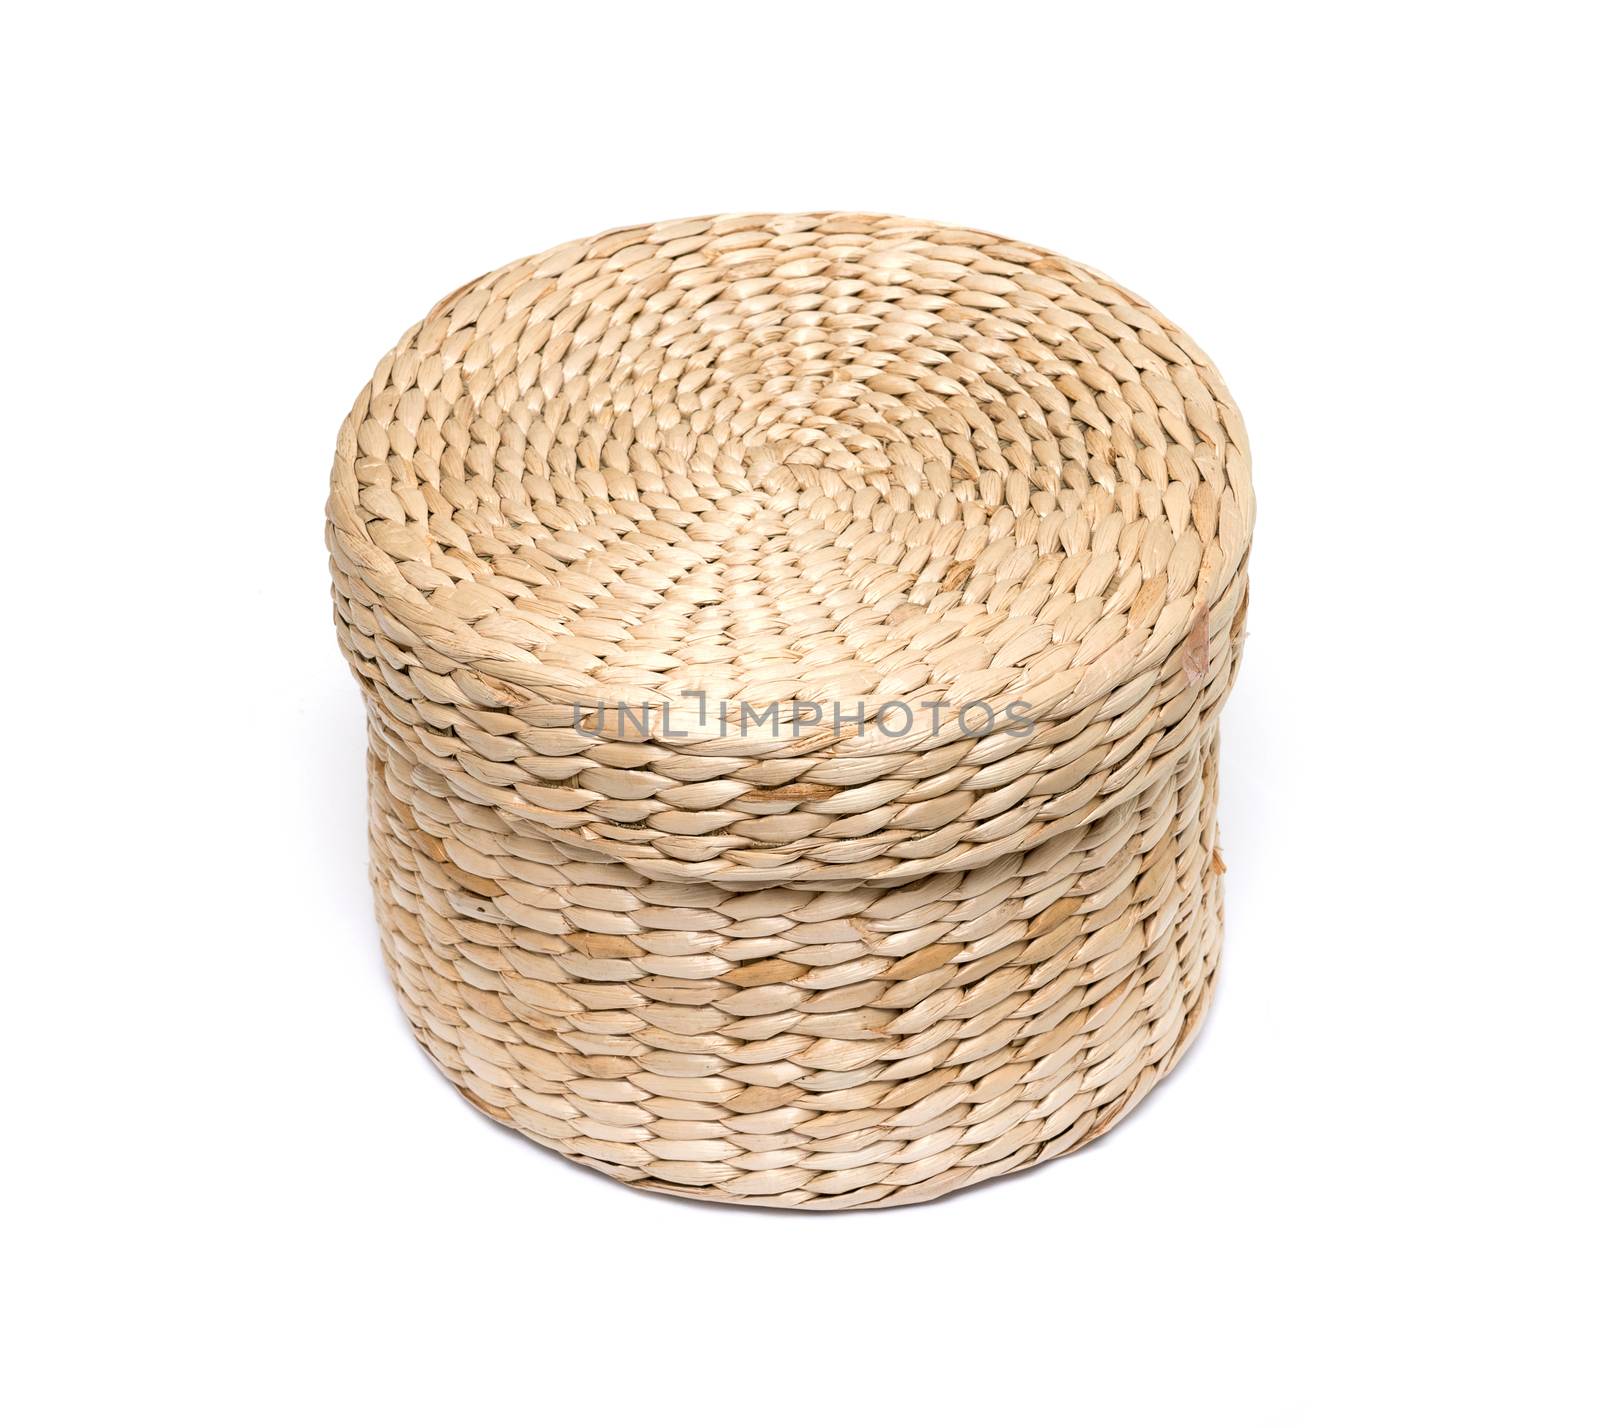 Small closed wicker box isolated on white